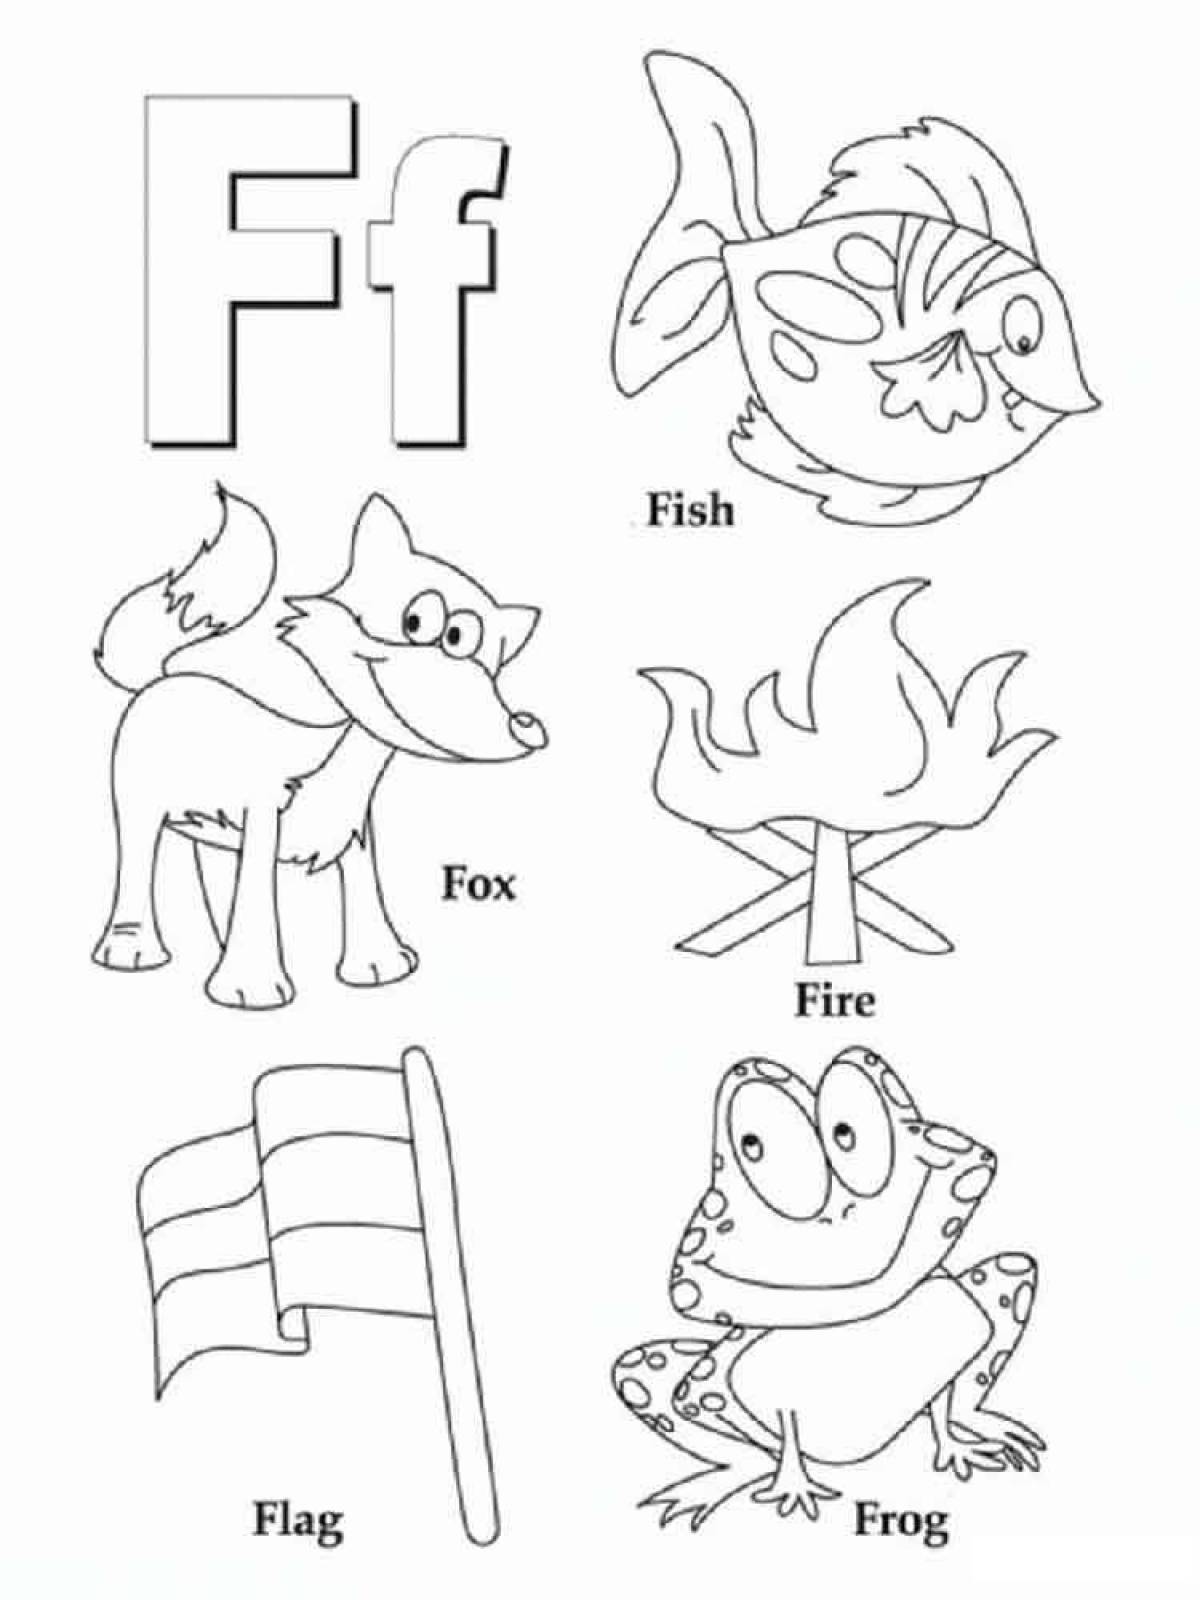 Comic coloring book with english alphabet